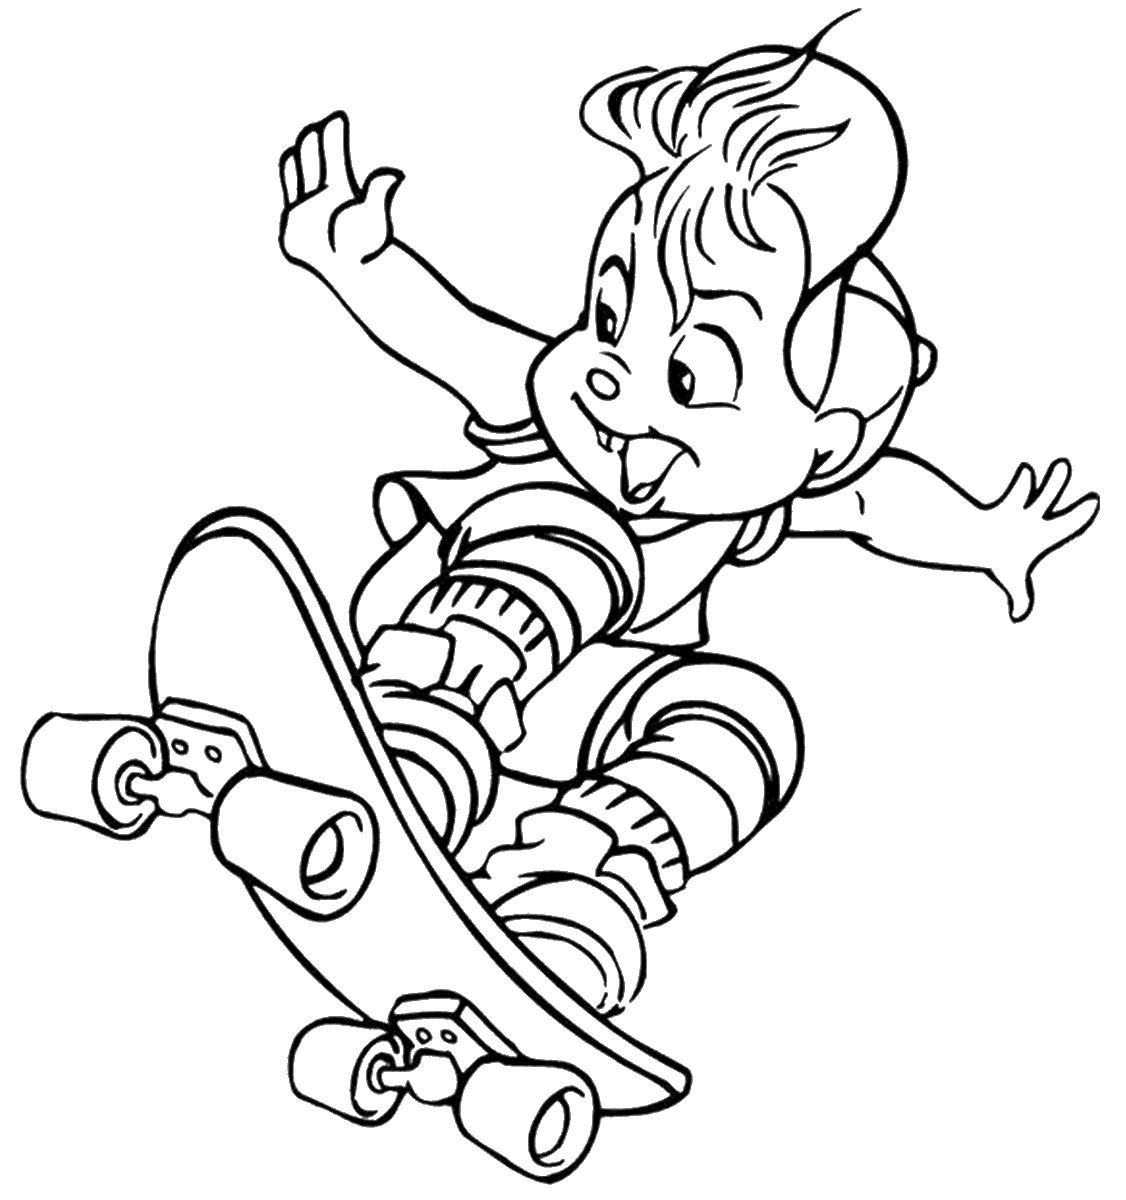 Alvin and the Chipmunks Coloring Pages TV Film alvin_cl_8 Printable 2020 00066 Coloring4free